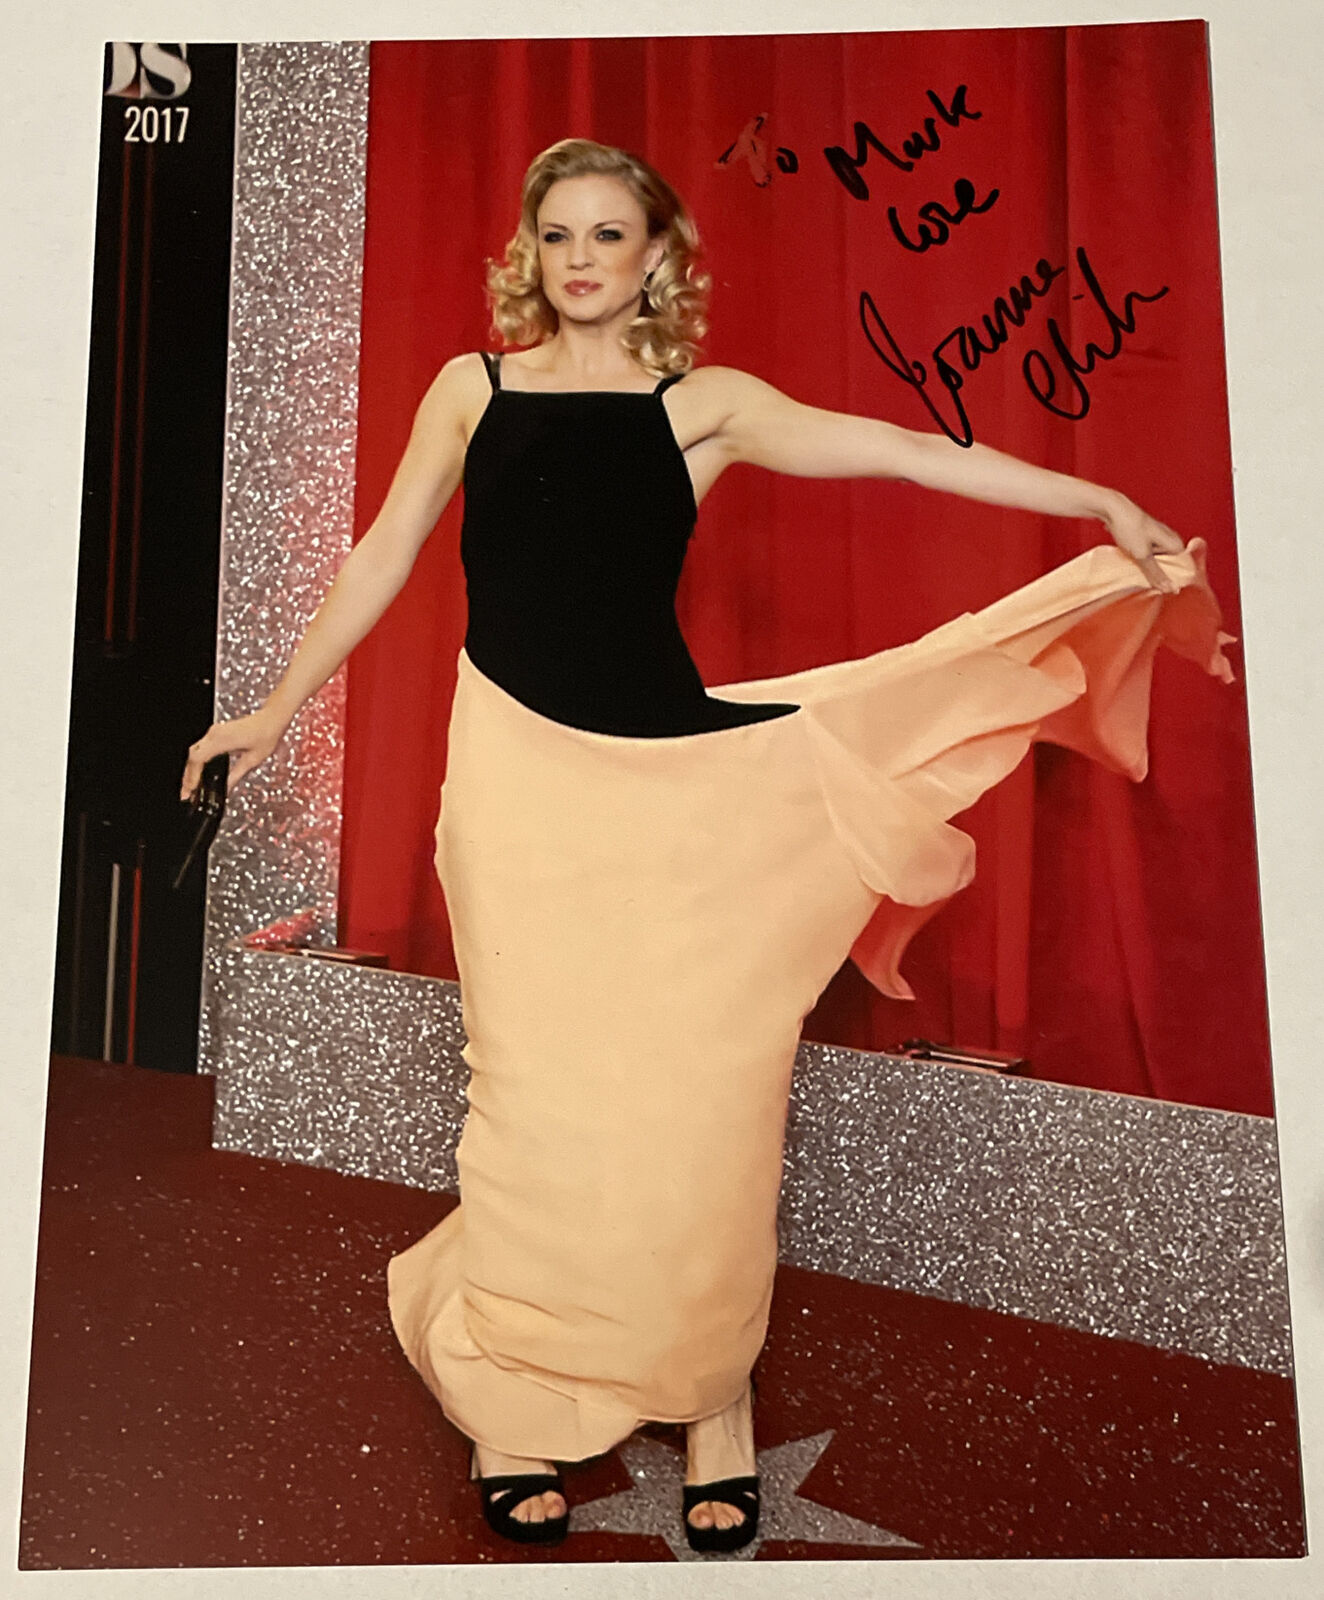 Joanne Clifton HAND SIGNED 8x6 Photo Poster painting AUTOGRAPH Damaged (Signed To Mark) Strictly